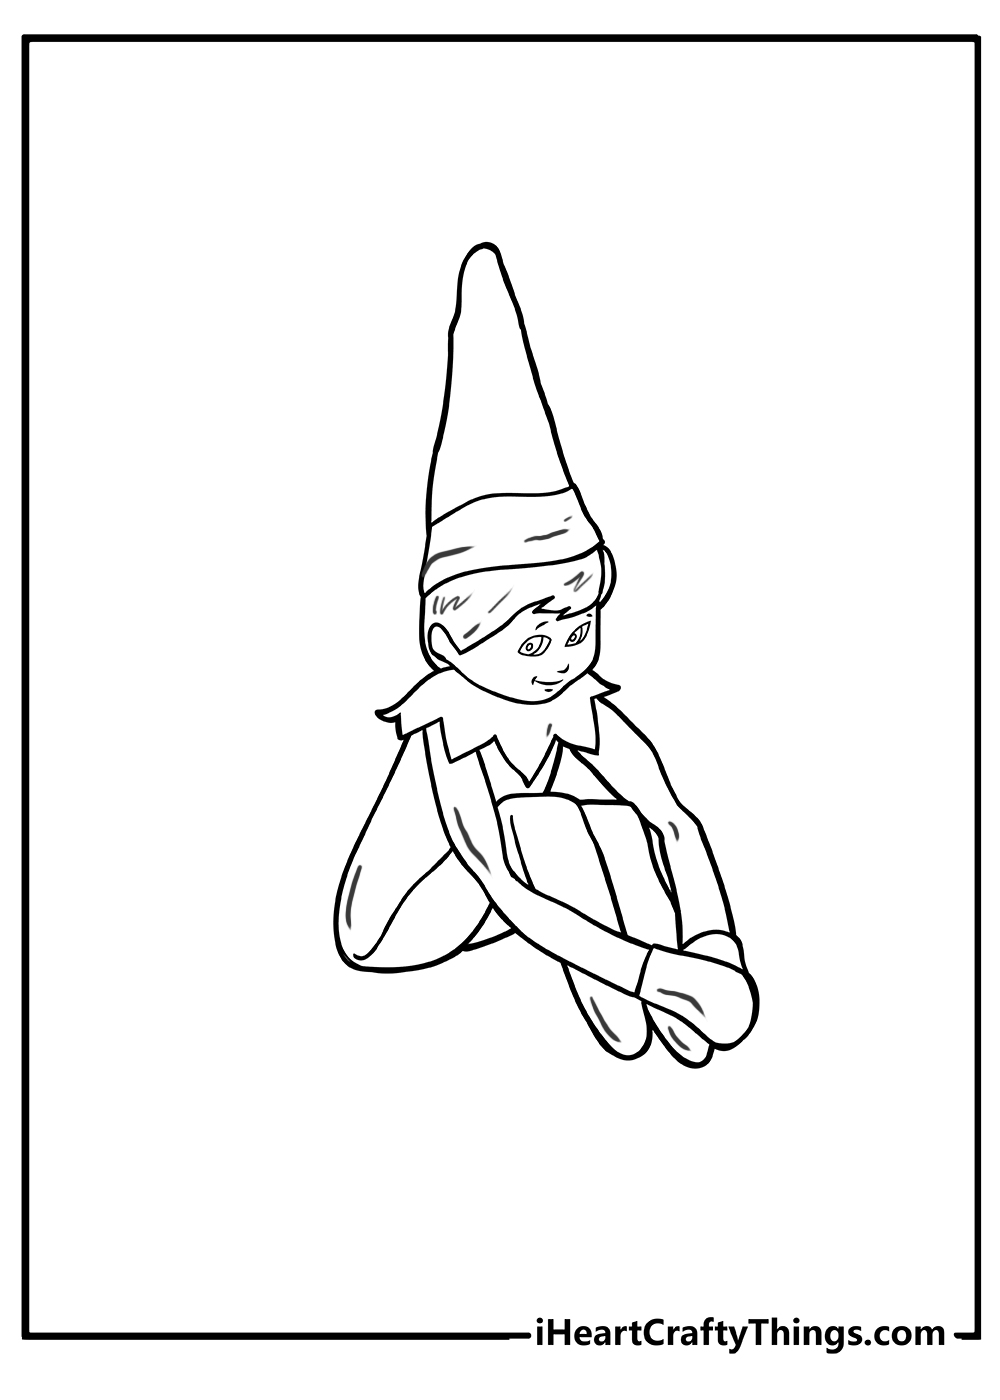 Elf on the Shelf Coloring Sheet for children free